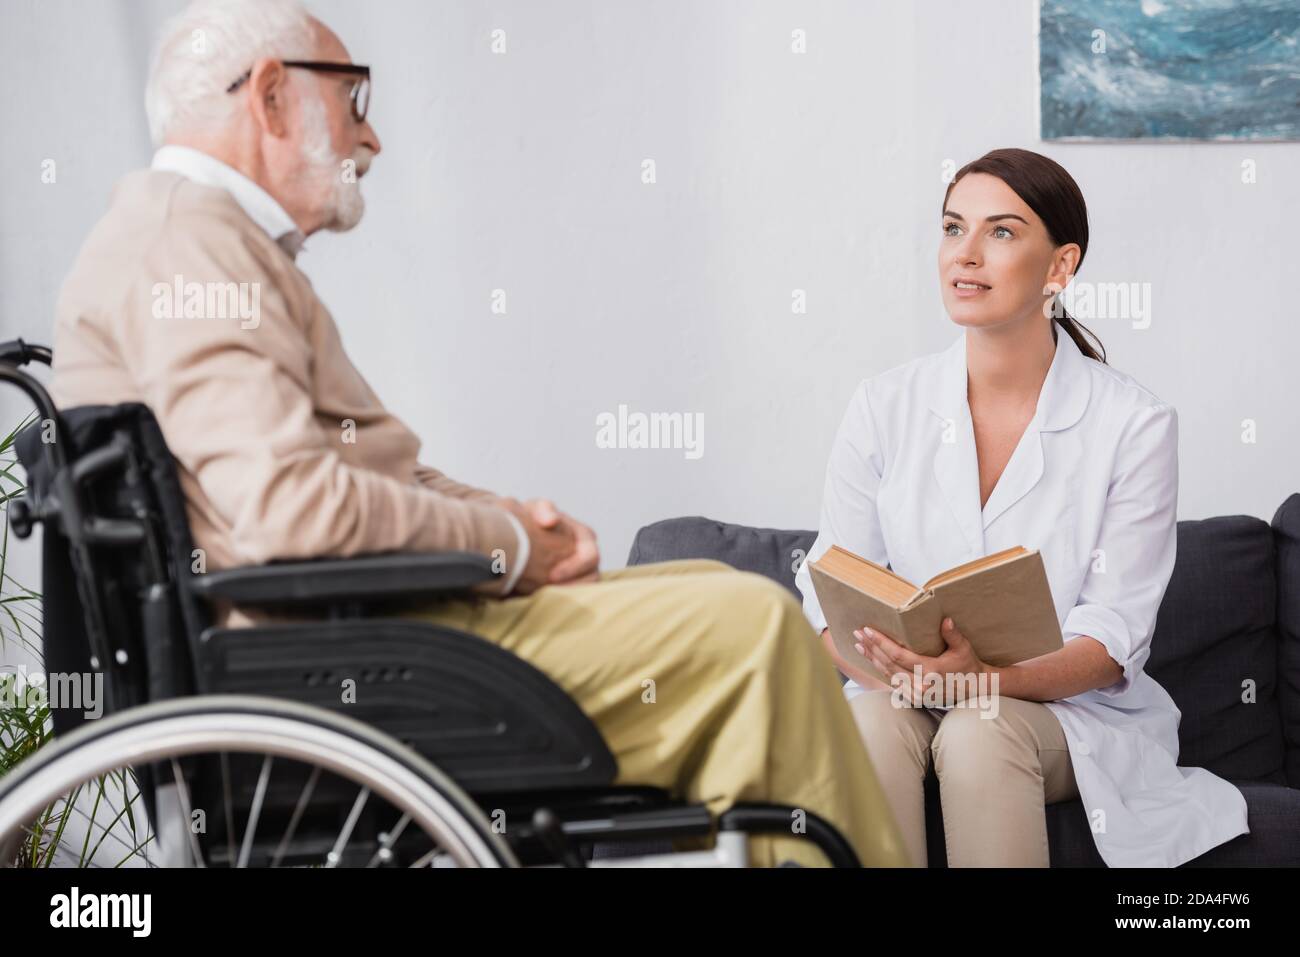 social worker in white coat reading book to aged disabled man in wheelchair on blurred foreground Stock Photo